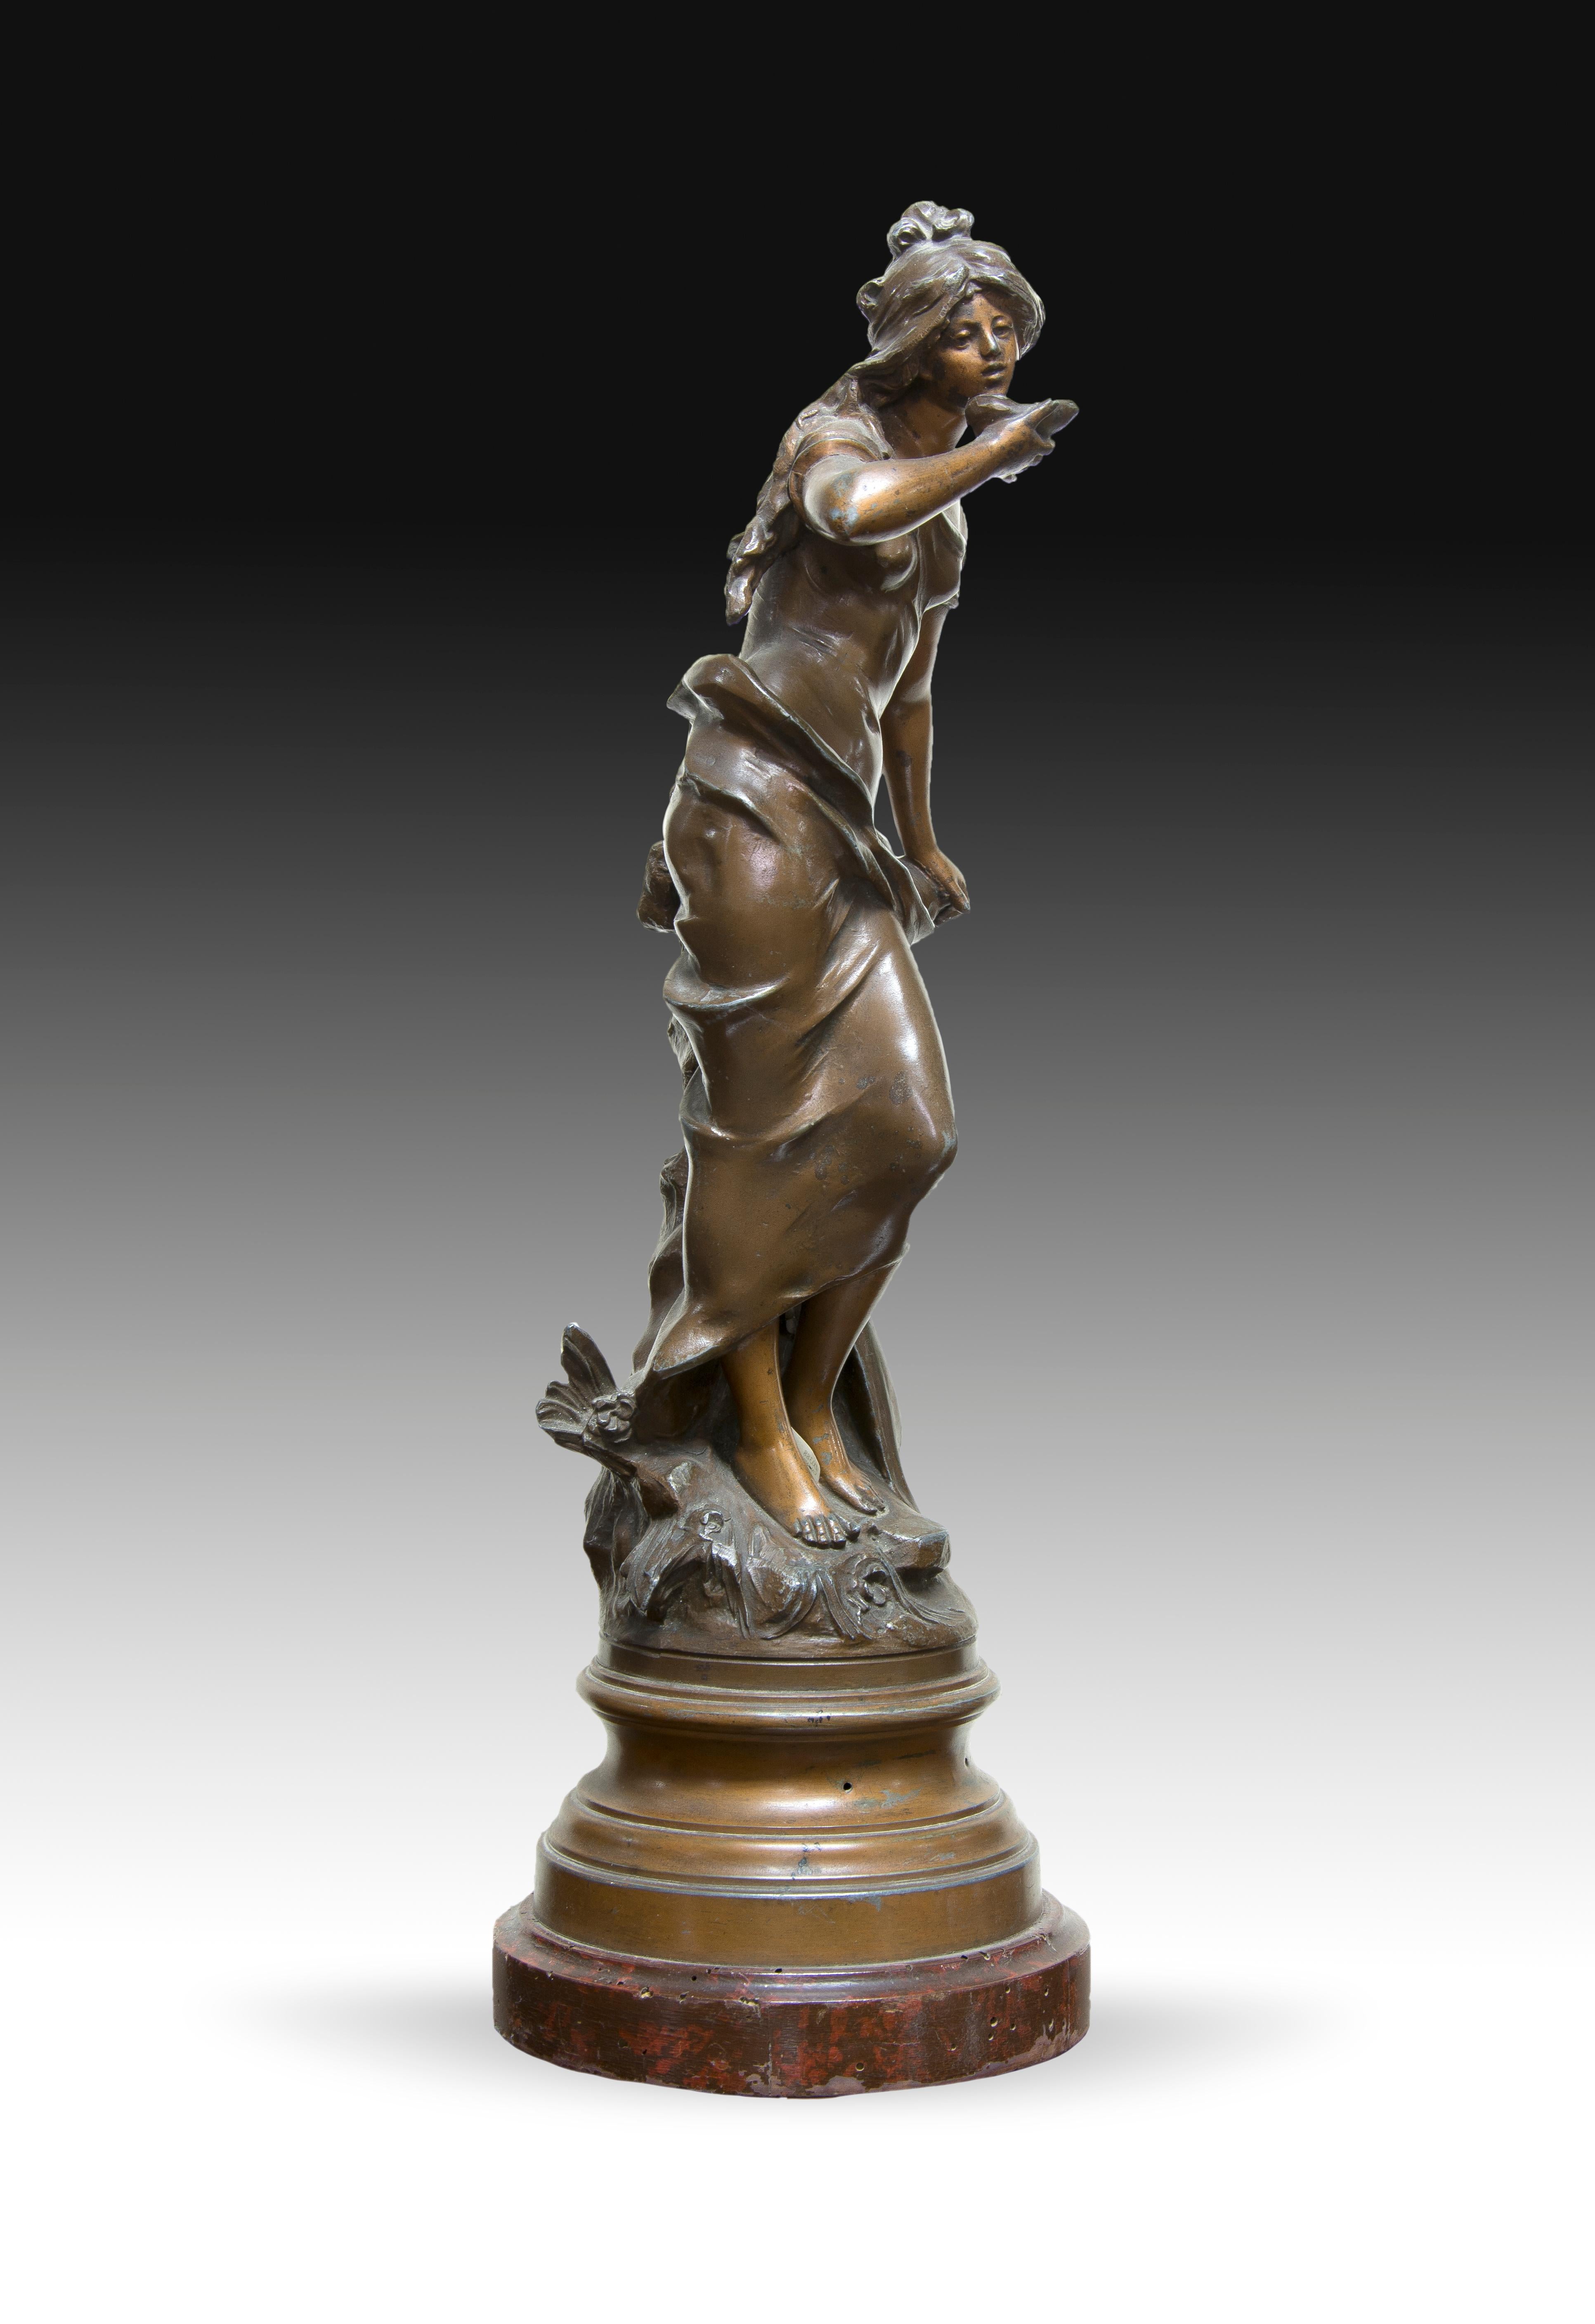 Sculpture in calamine. Signed “Aug. Moreau ”. Following models by Auguste Moreau, France, 19th century.
 It is reminiscent of works such as the bronze entitled 